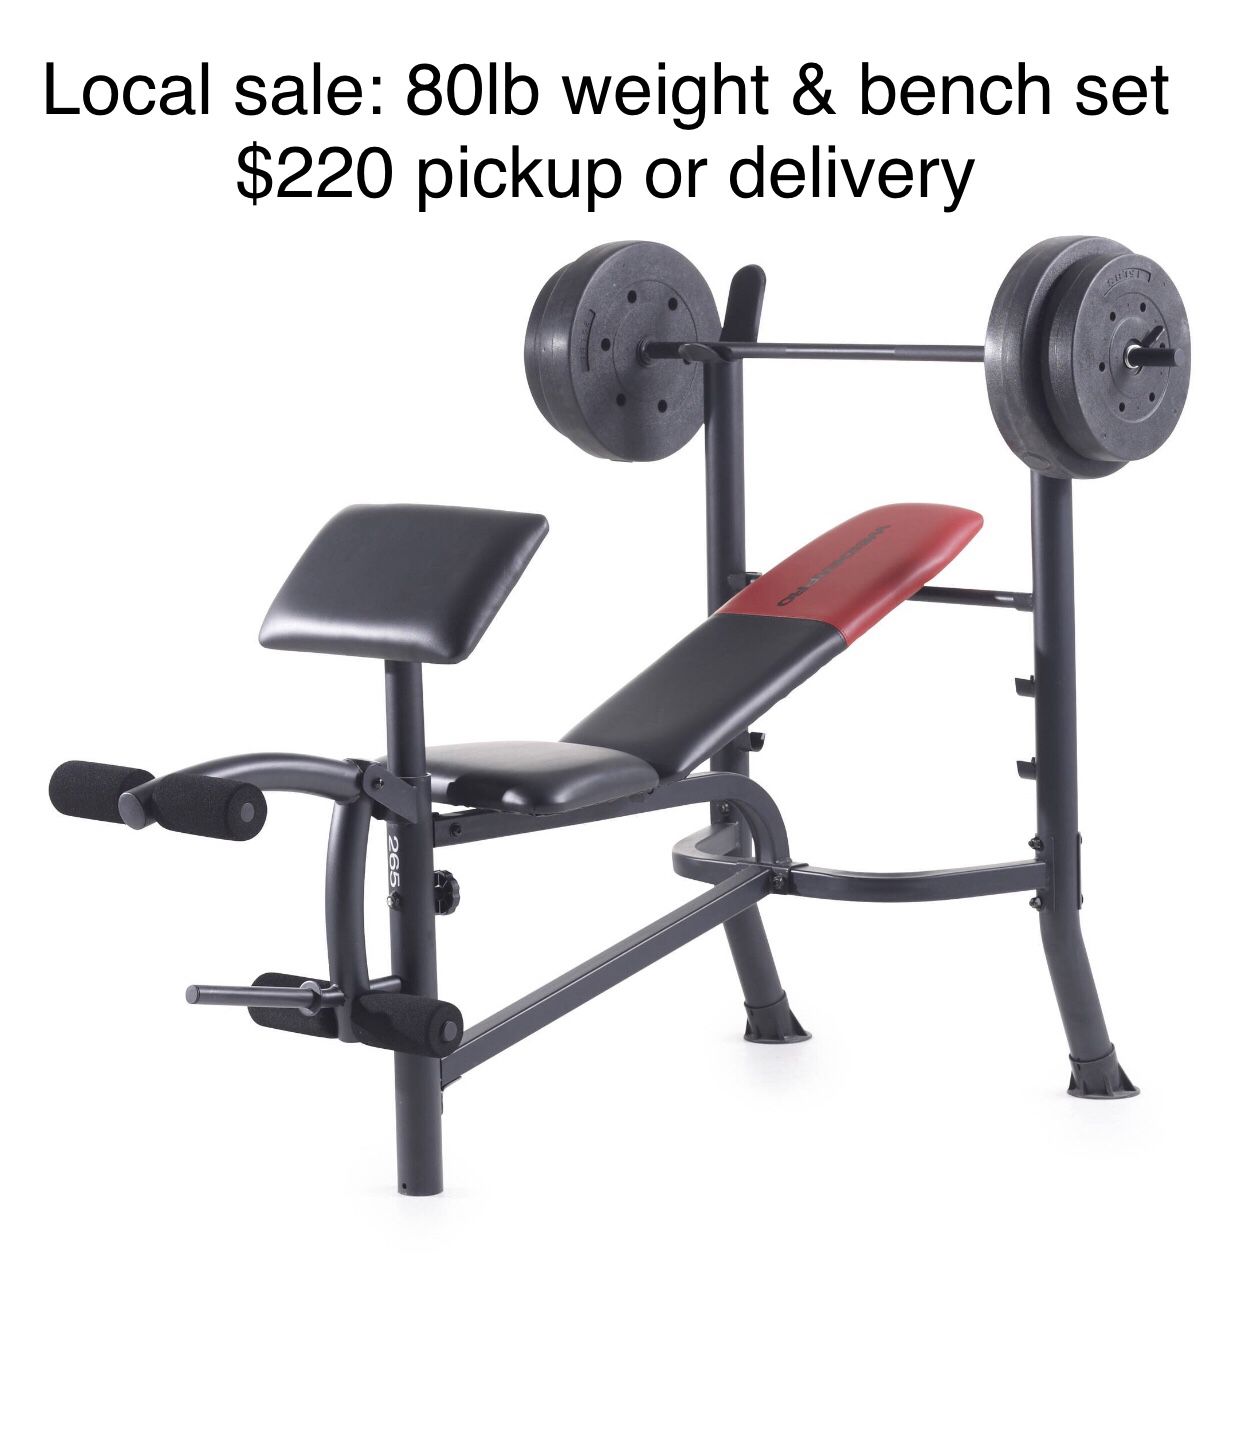 Brand new In box. Utility weight bench with rack , leg extension and preacher curl workout areas, also includes 80lbs of weight plates and a barbell